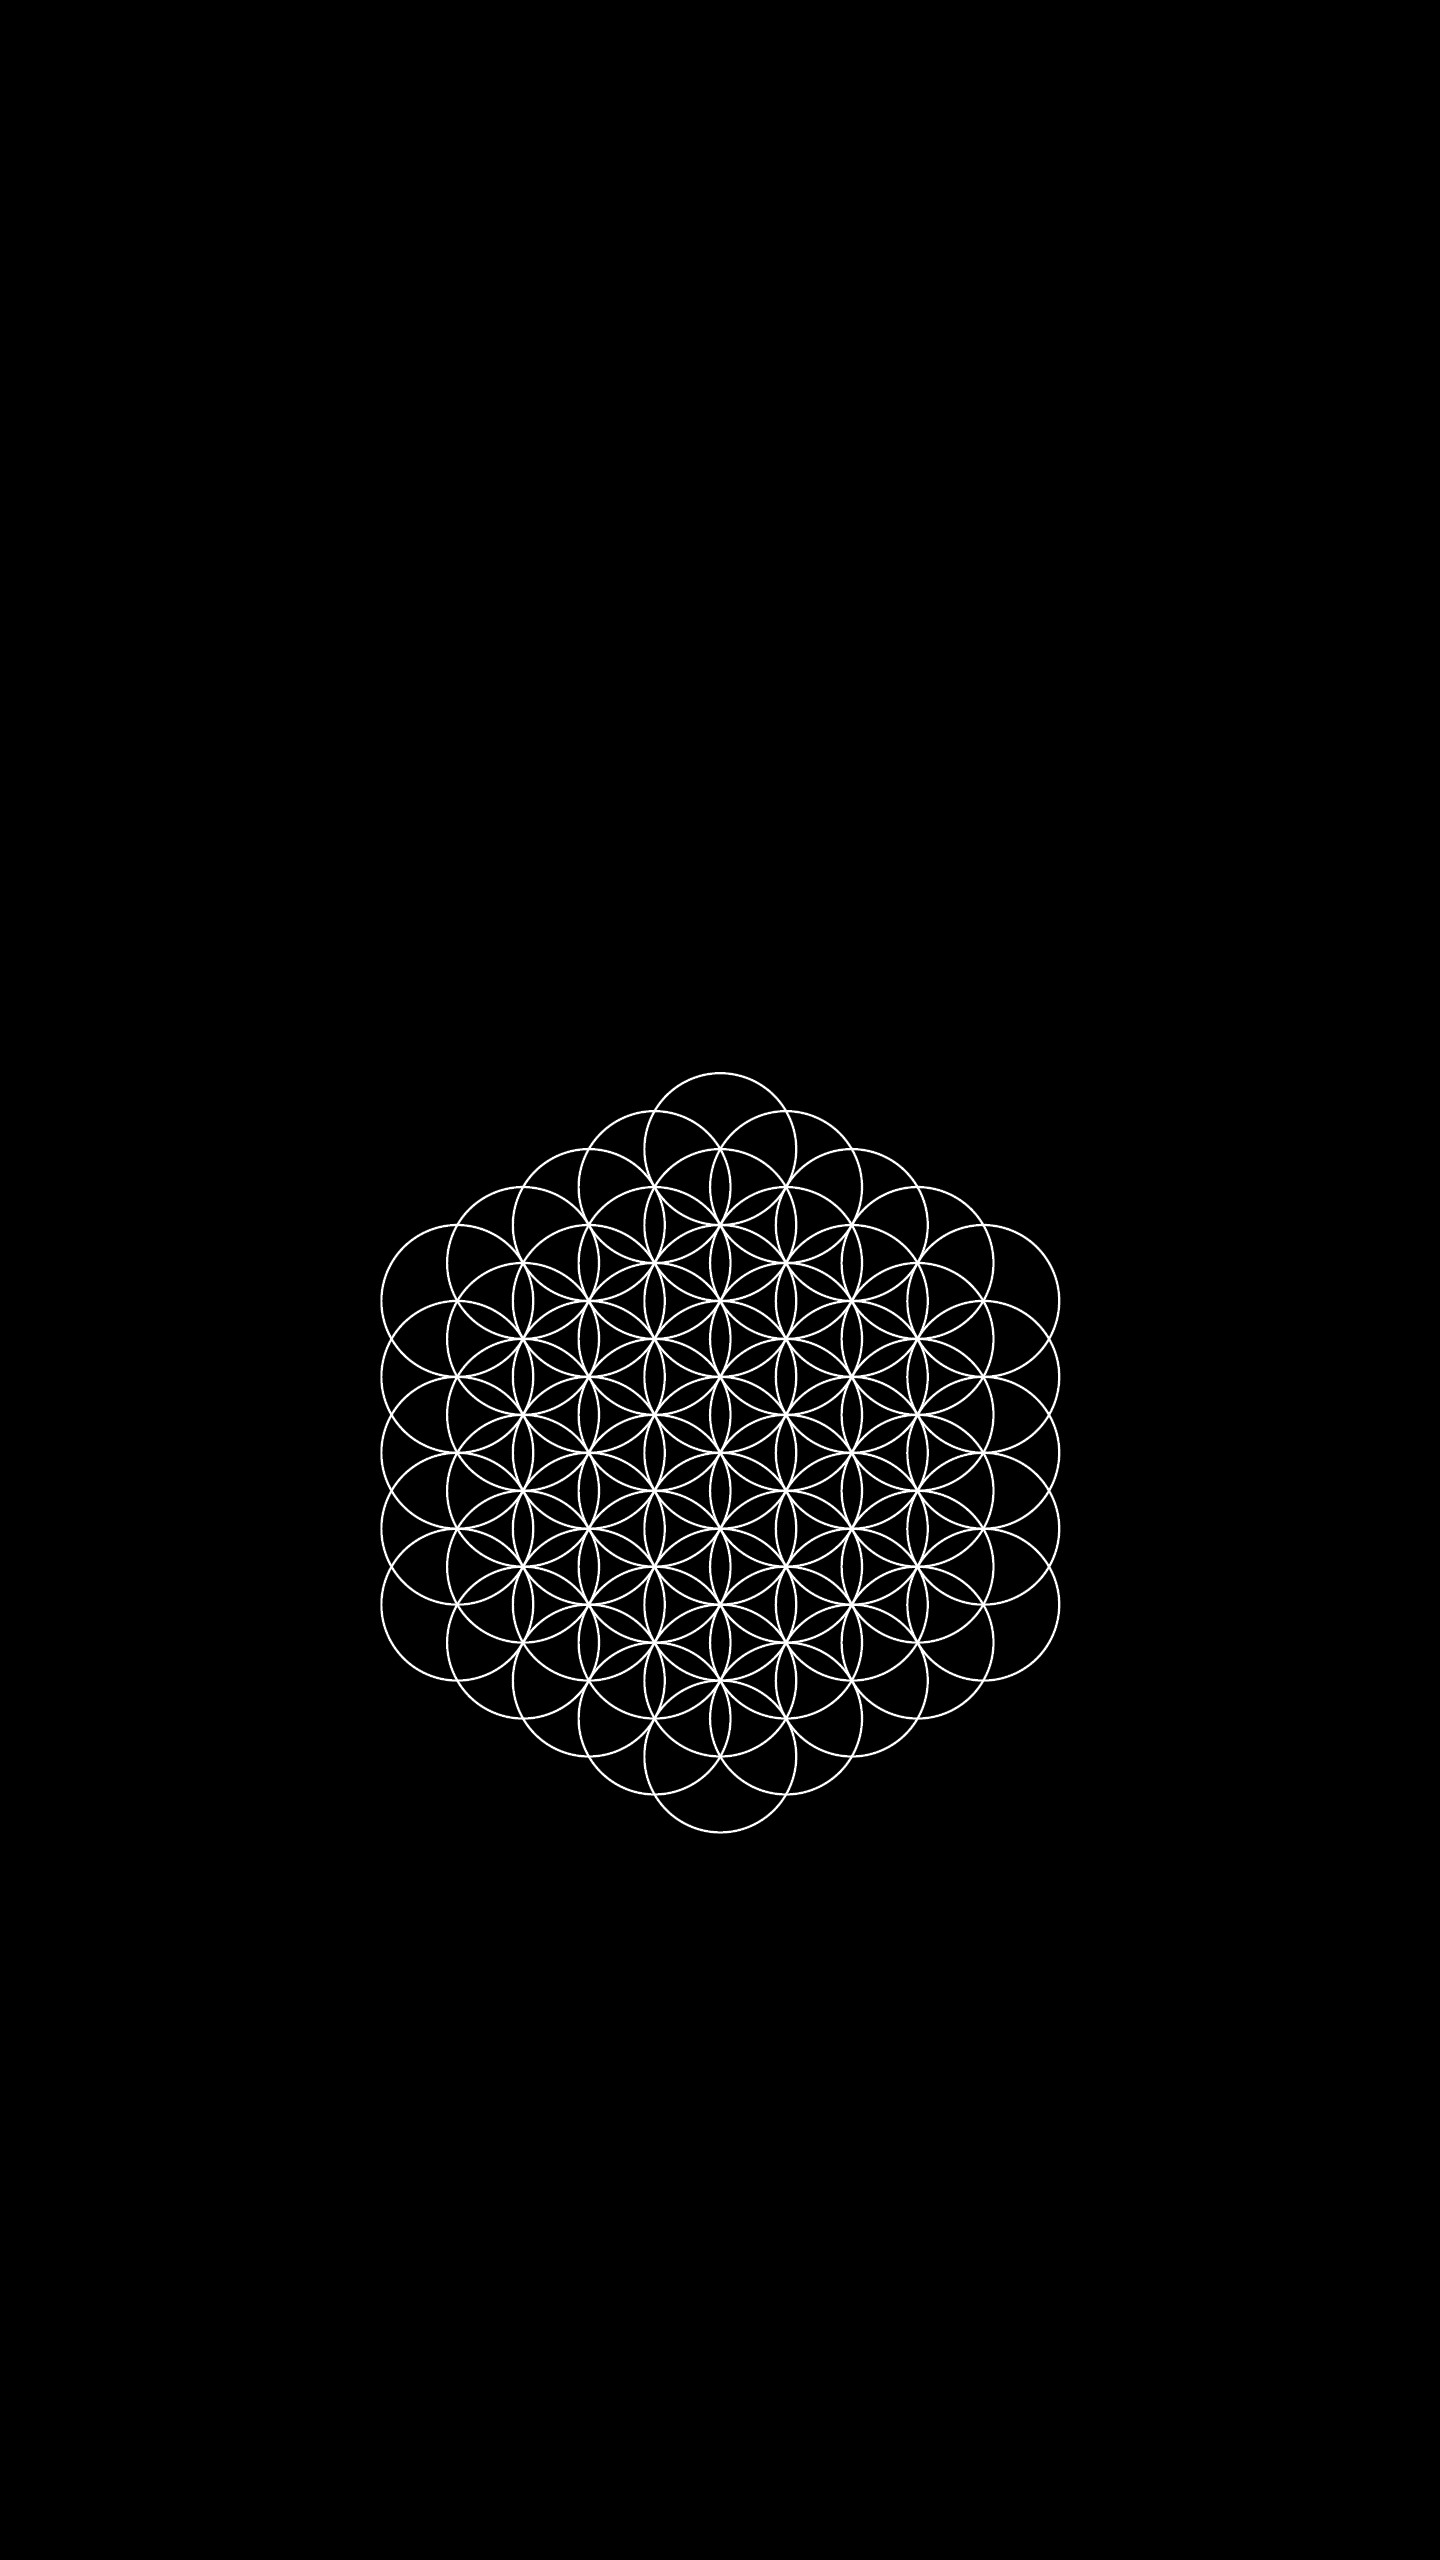 Thanks for the help today, couldnt find one so I made myself a flower of life wallpaper